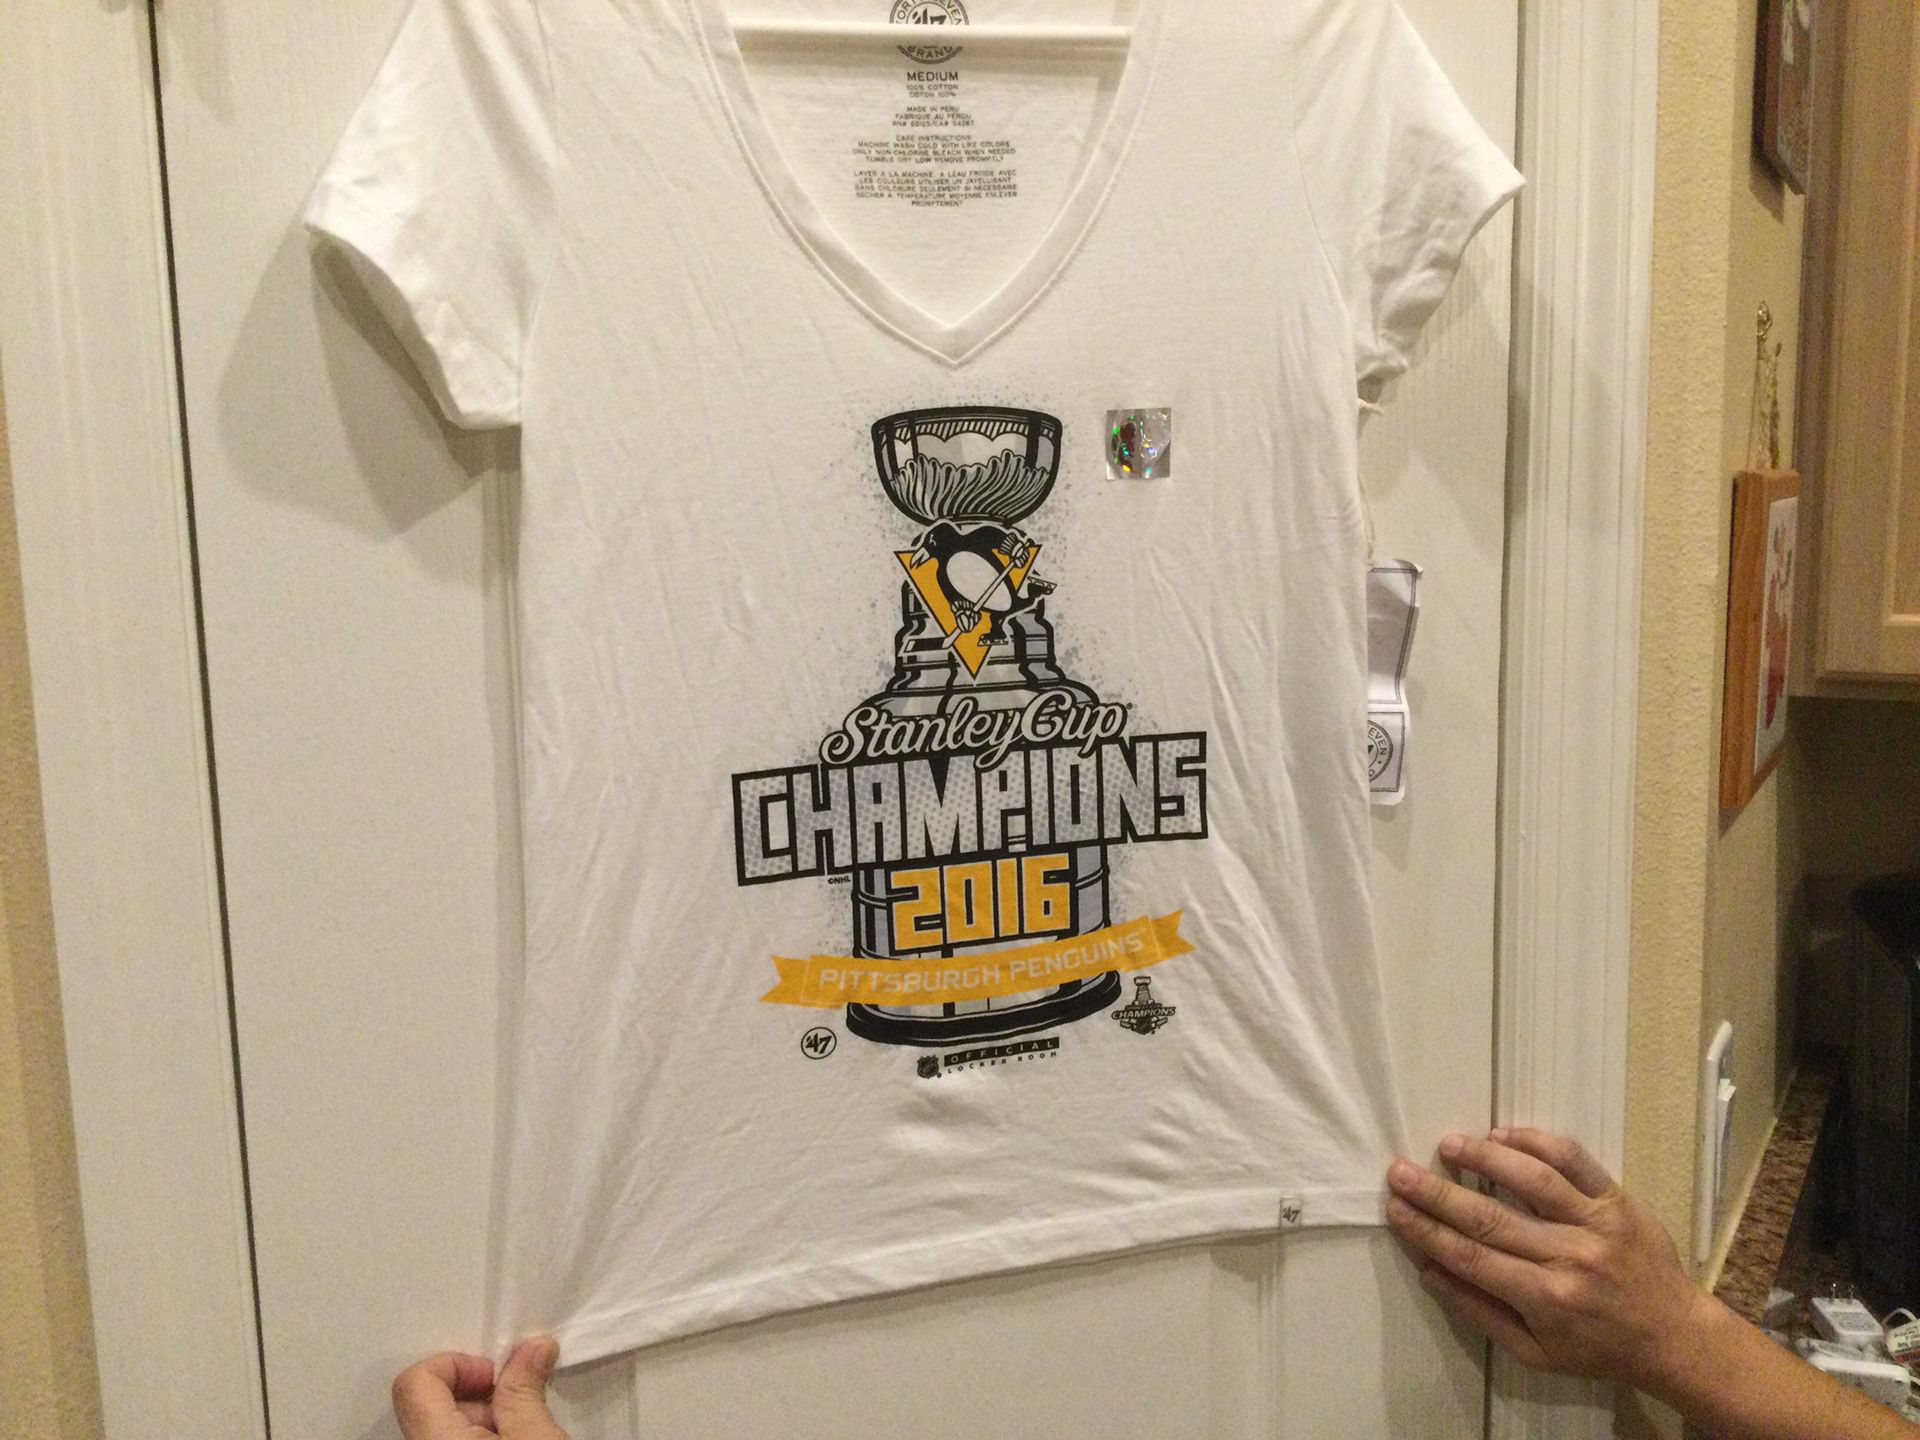 NHL Pttsburgh Penguins Stanley Cup Champions.